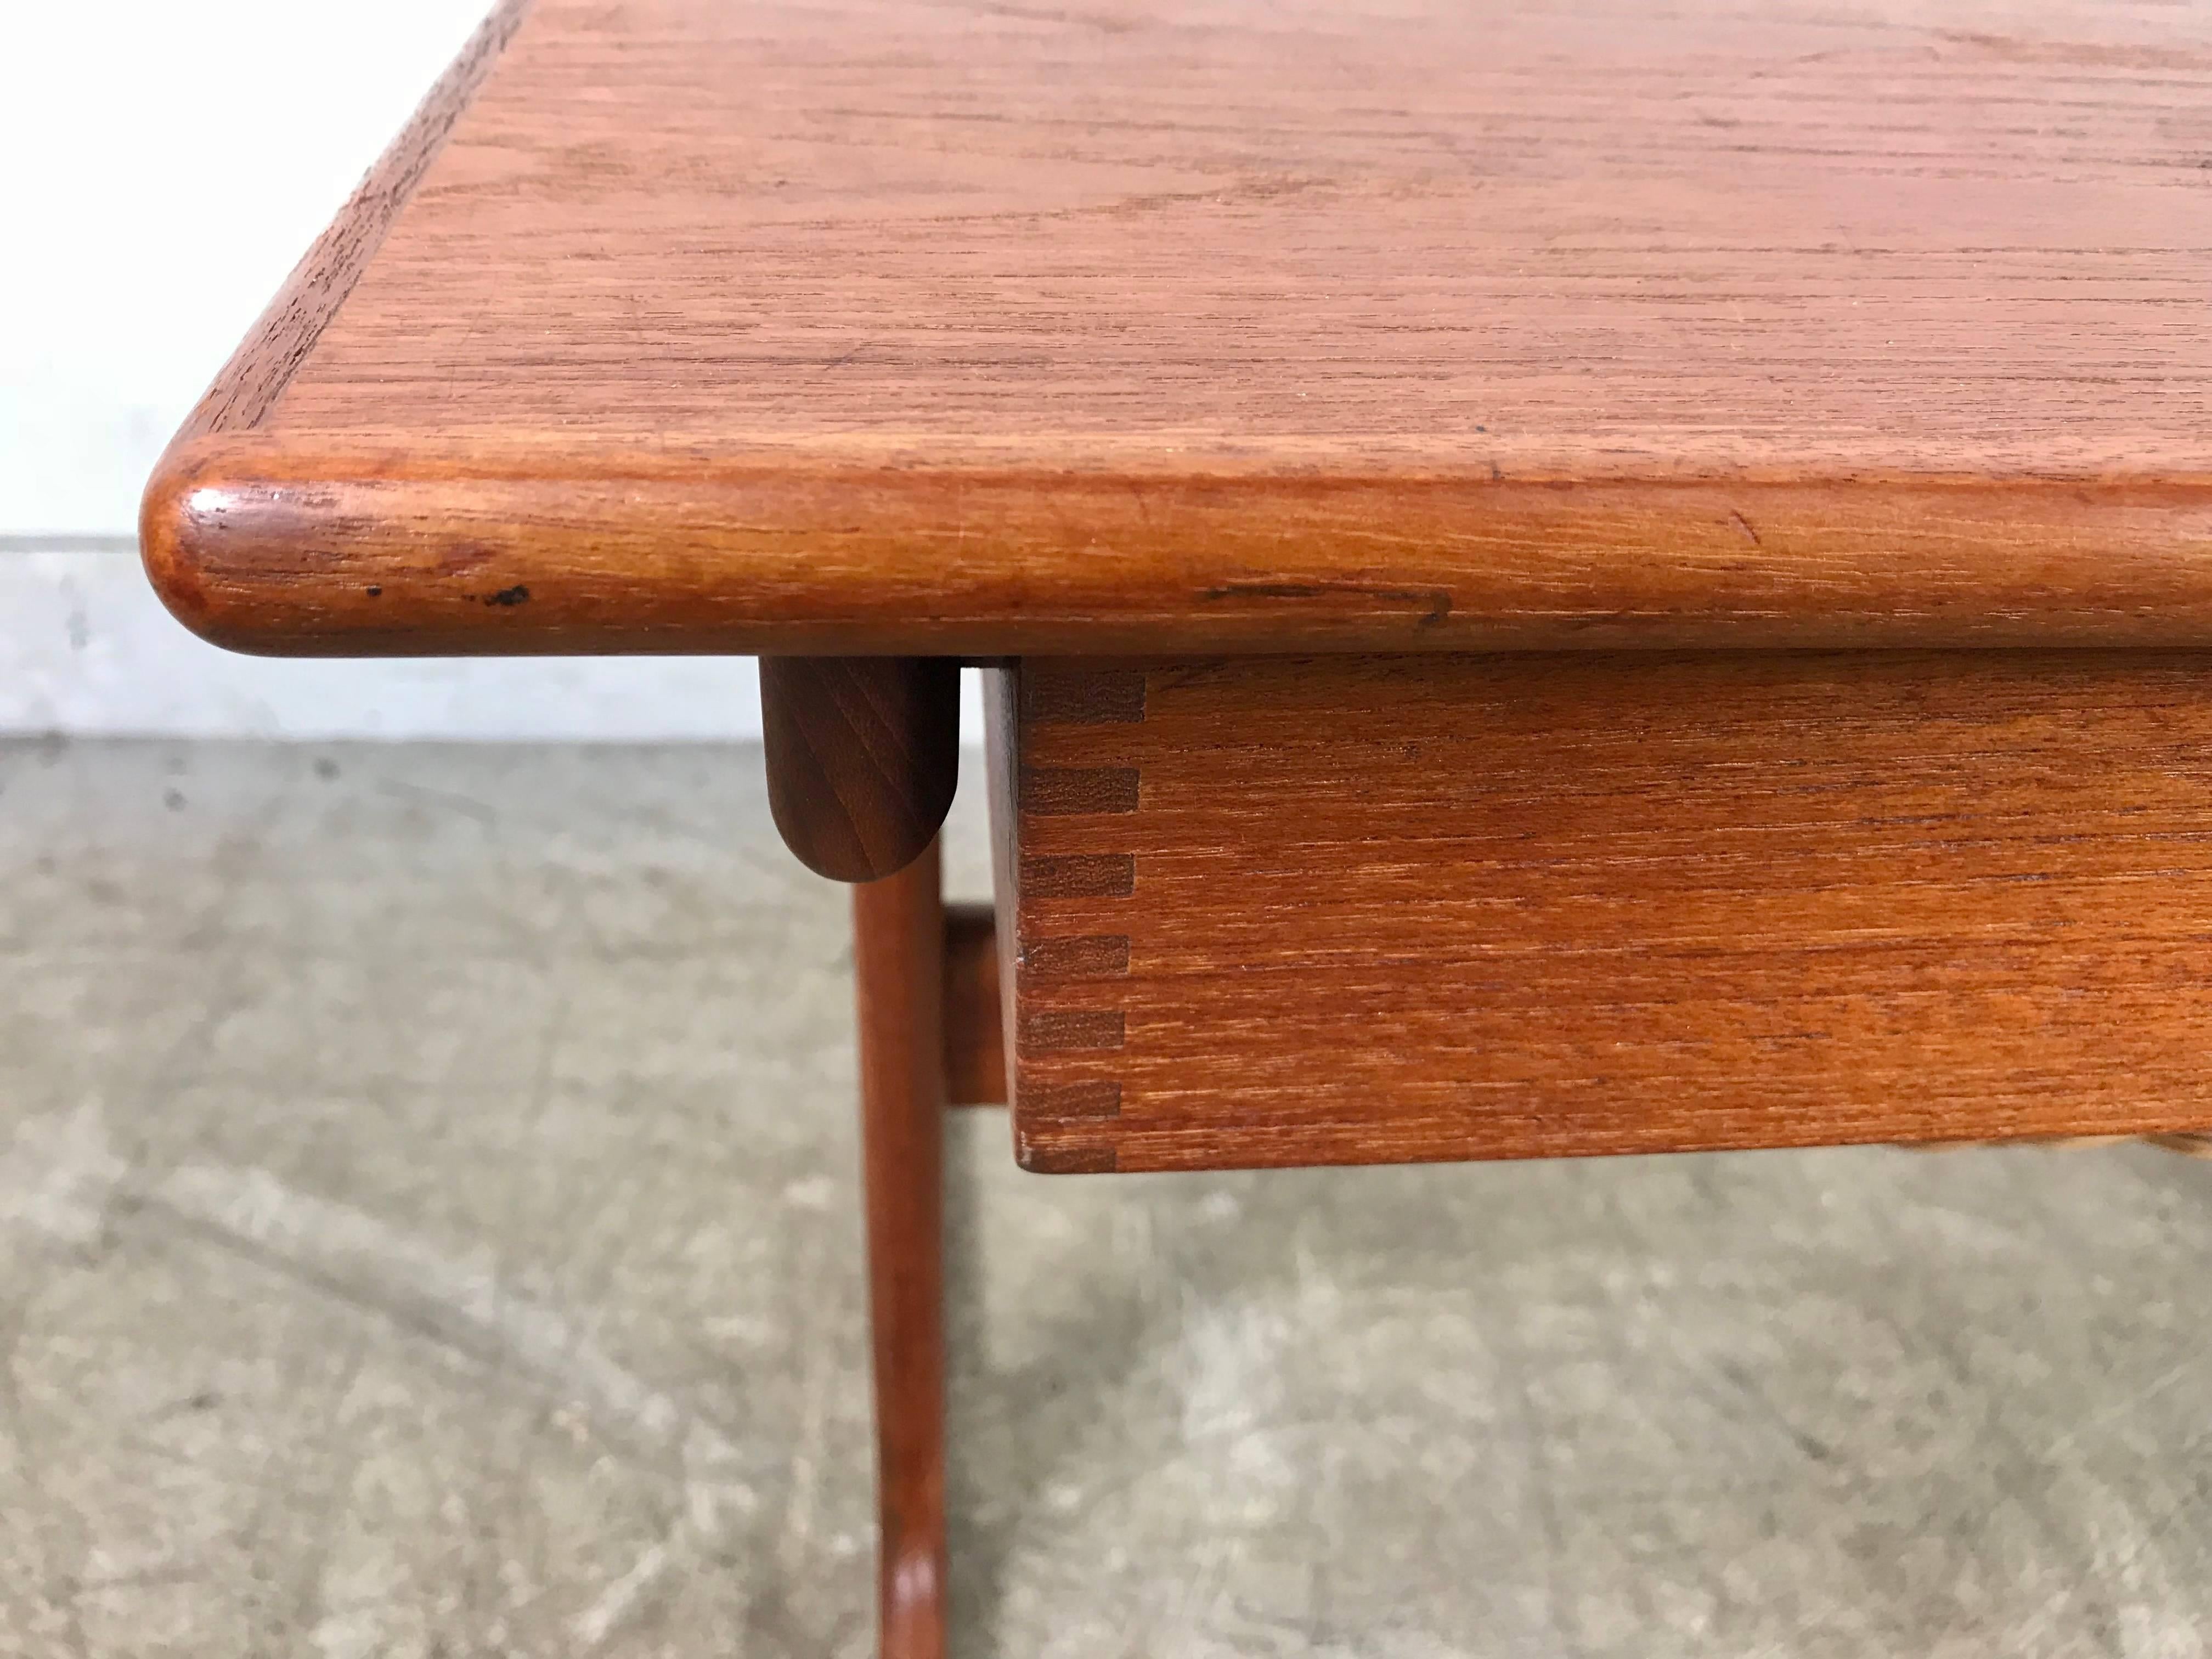 This teak sewing table was designed by Severin Hansen Jr. for Haslev Mobelsnedkeri in the 1960s and is comprised of a woven rattan basket below a shallow, hidden finger joint drawer, fitted for sewing implements, although the piece was designed to